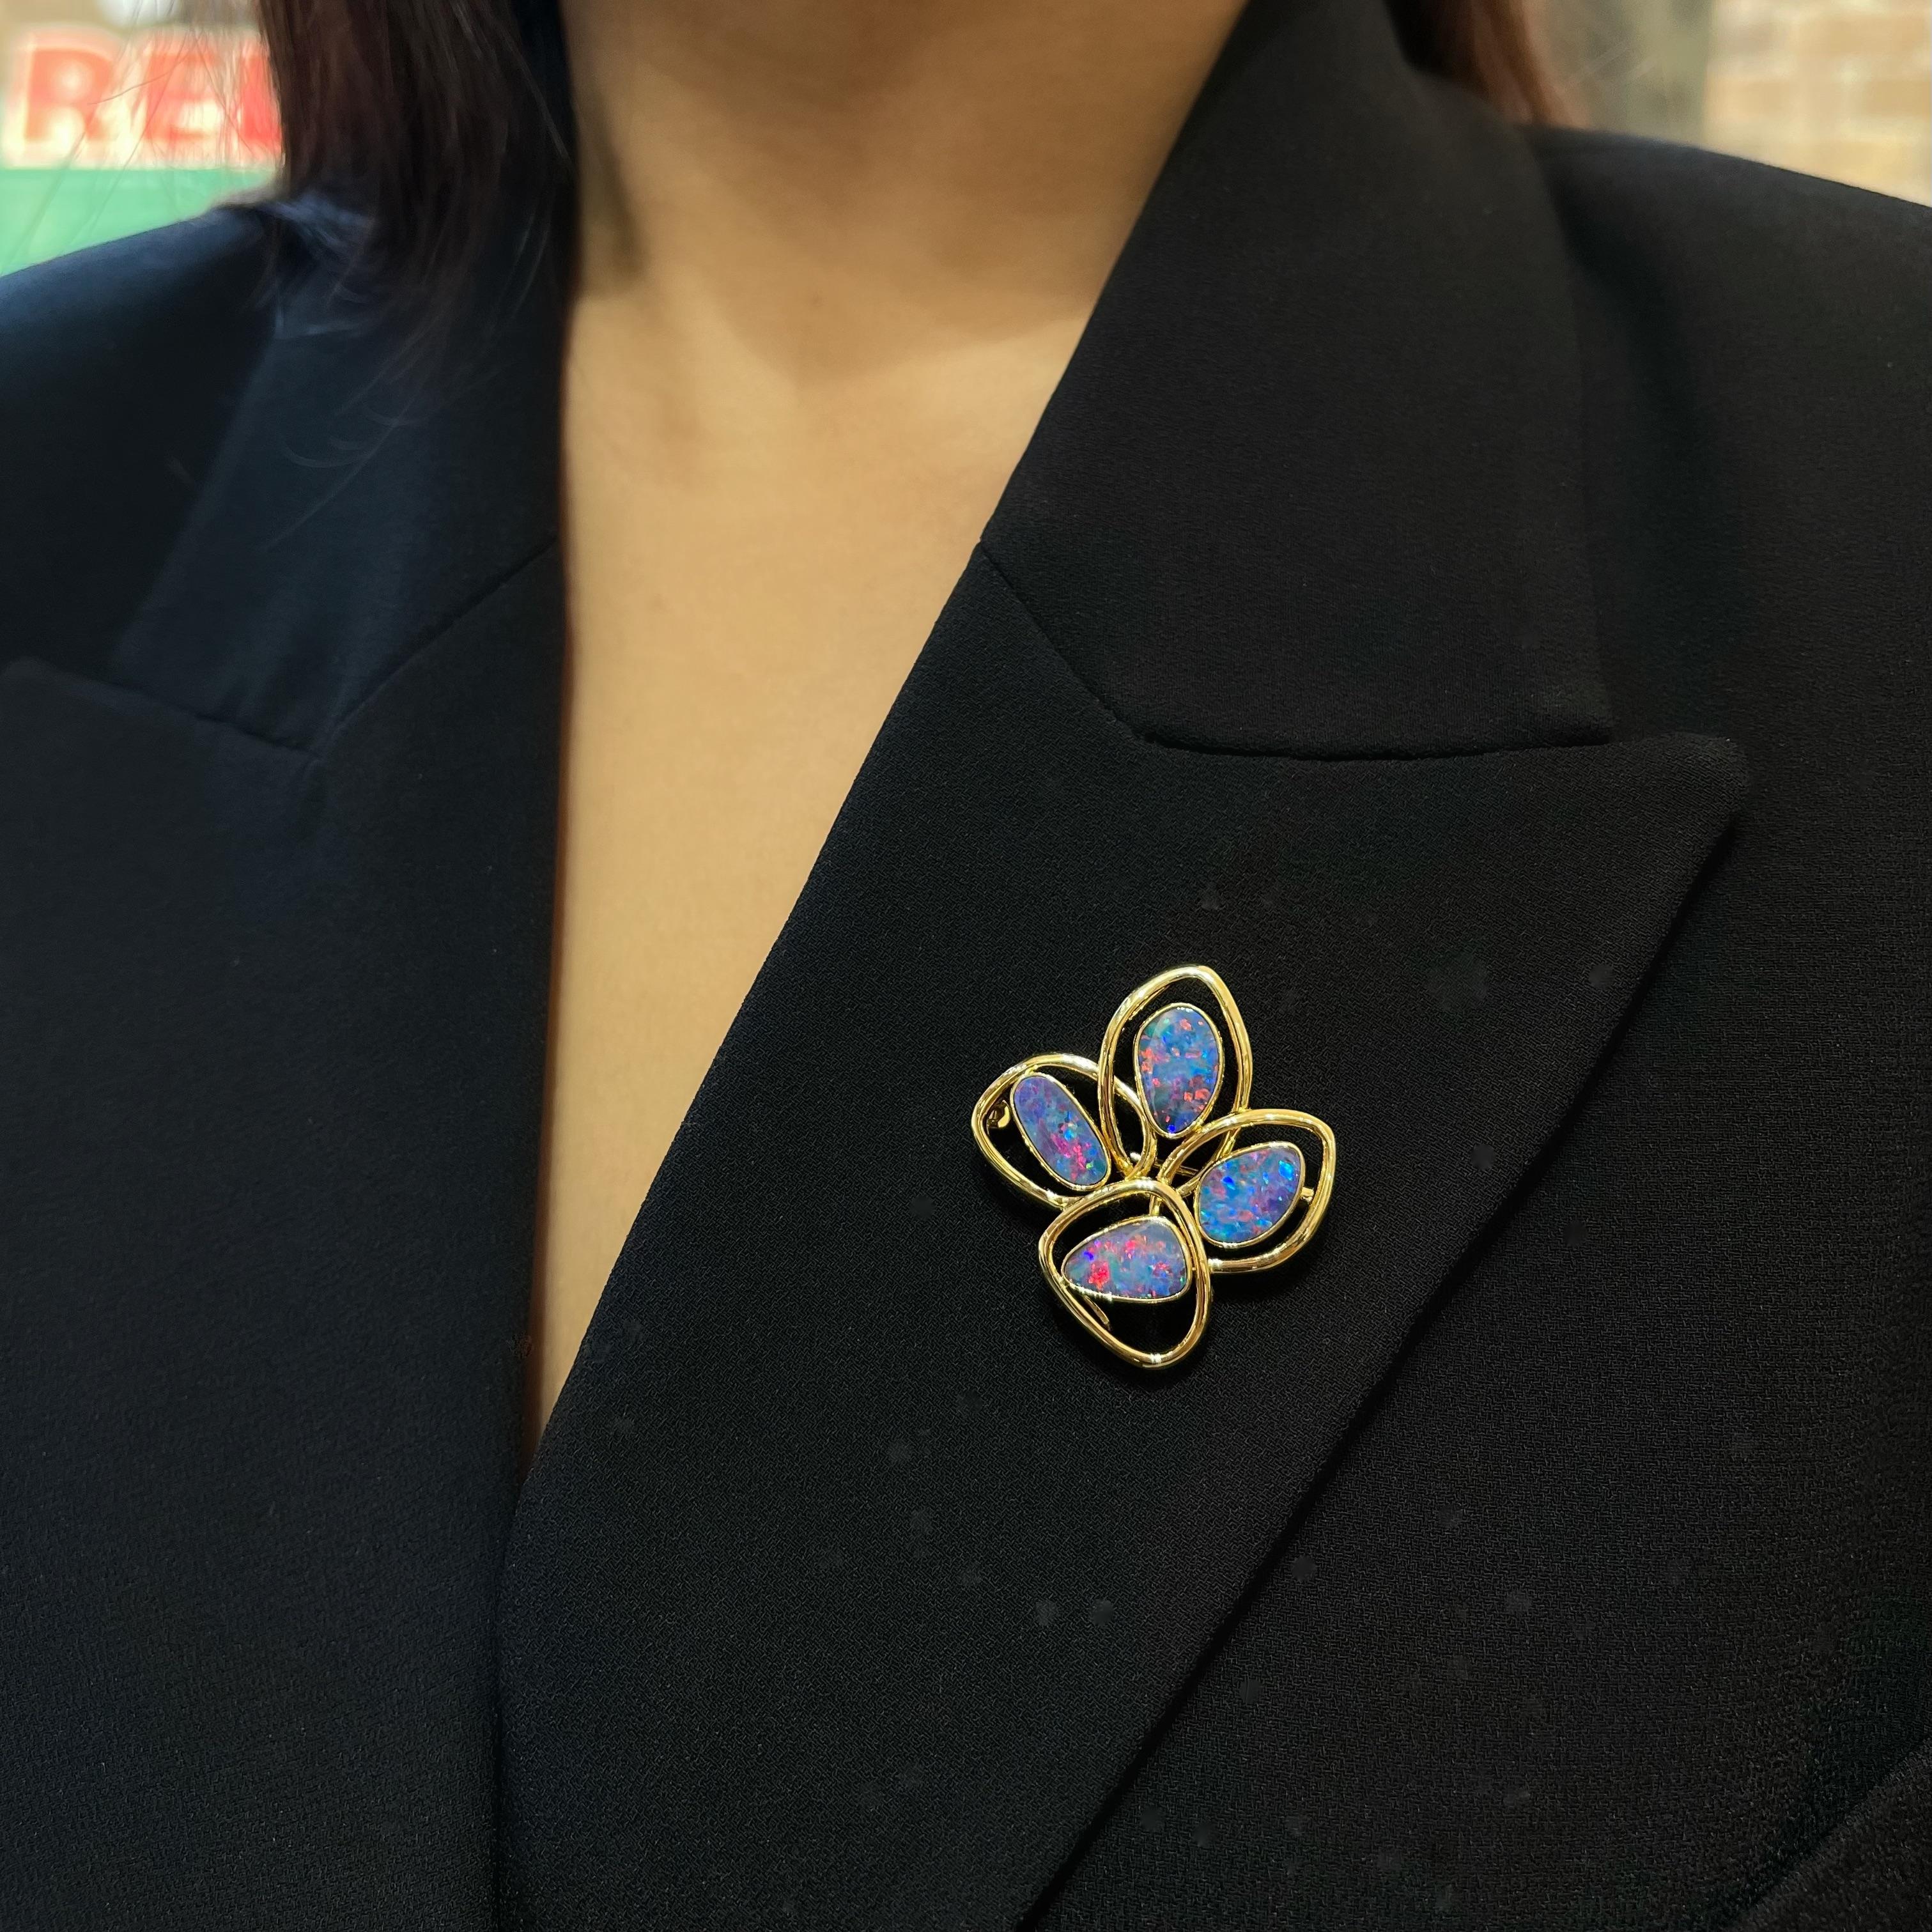 Intricate and opulent, the ‘Florella’ opal doublet brooch (4.29ct) is skillfully set in a beautifully interwoven 18K Yellow Gold lattice. In this piece, the delicate beauty of flower petals is reimagined in the language of fine opal jewelry.